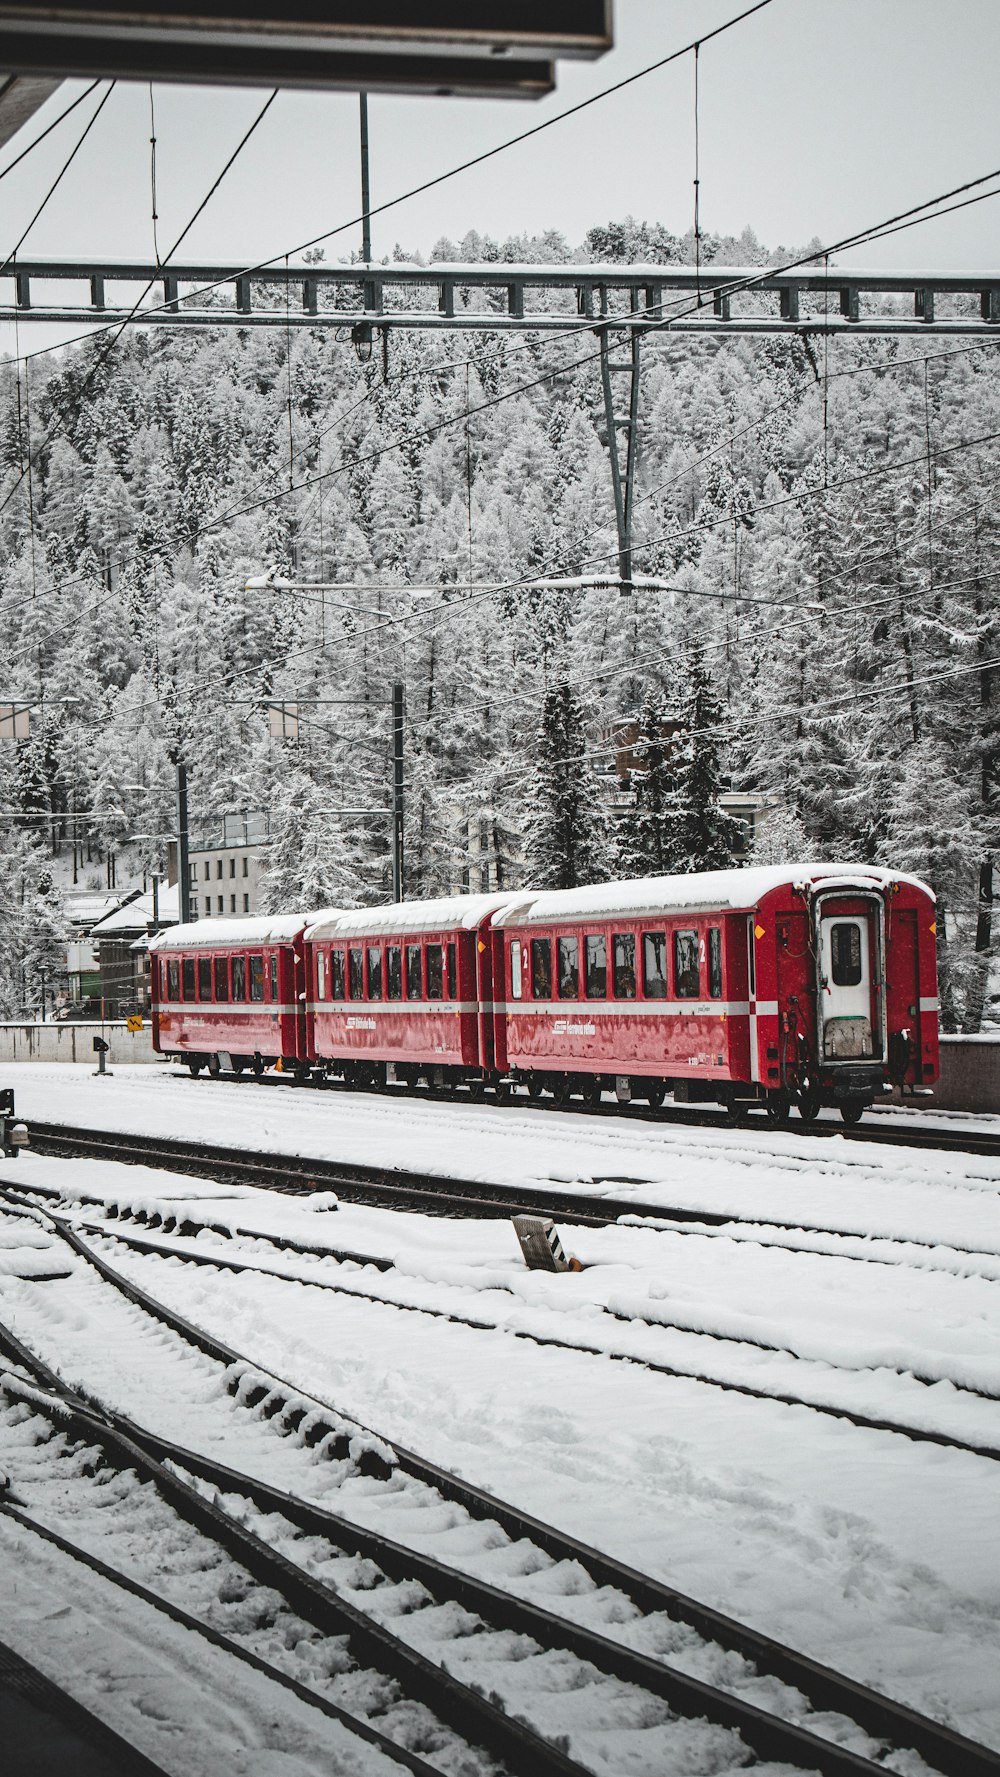 a red train traveling down train tracks next to a forest